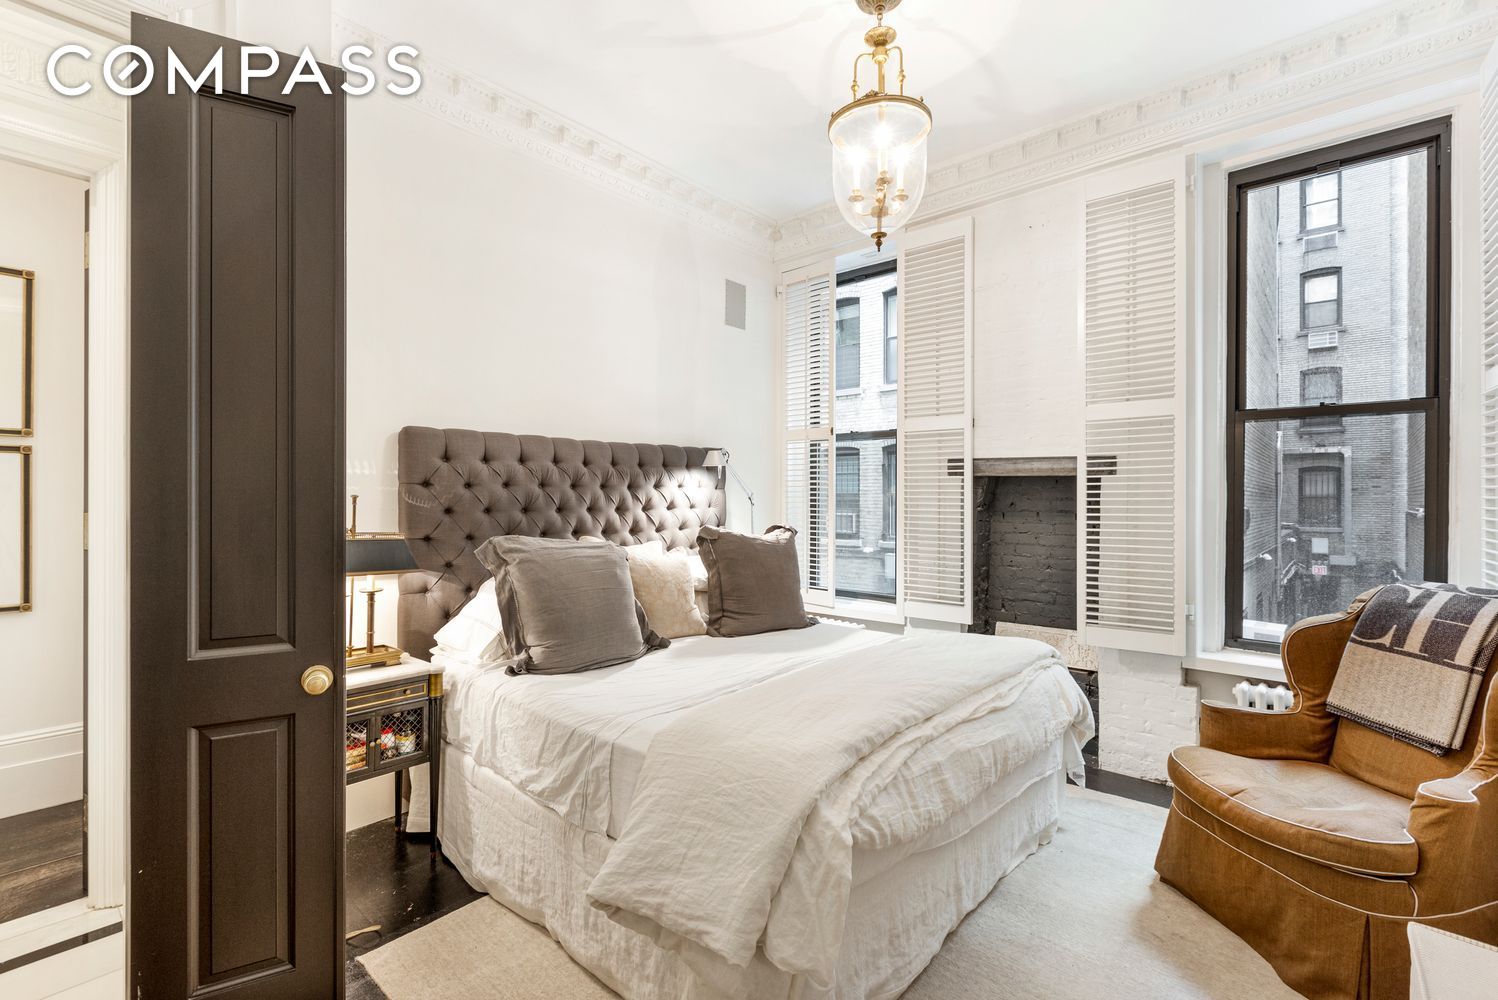 55 East 76th Street One D, Lenox Hill, Upper East Side, NYC - 2 Bedrooms  
1 Bathrooms  
5 Rooms - 